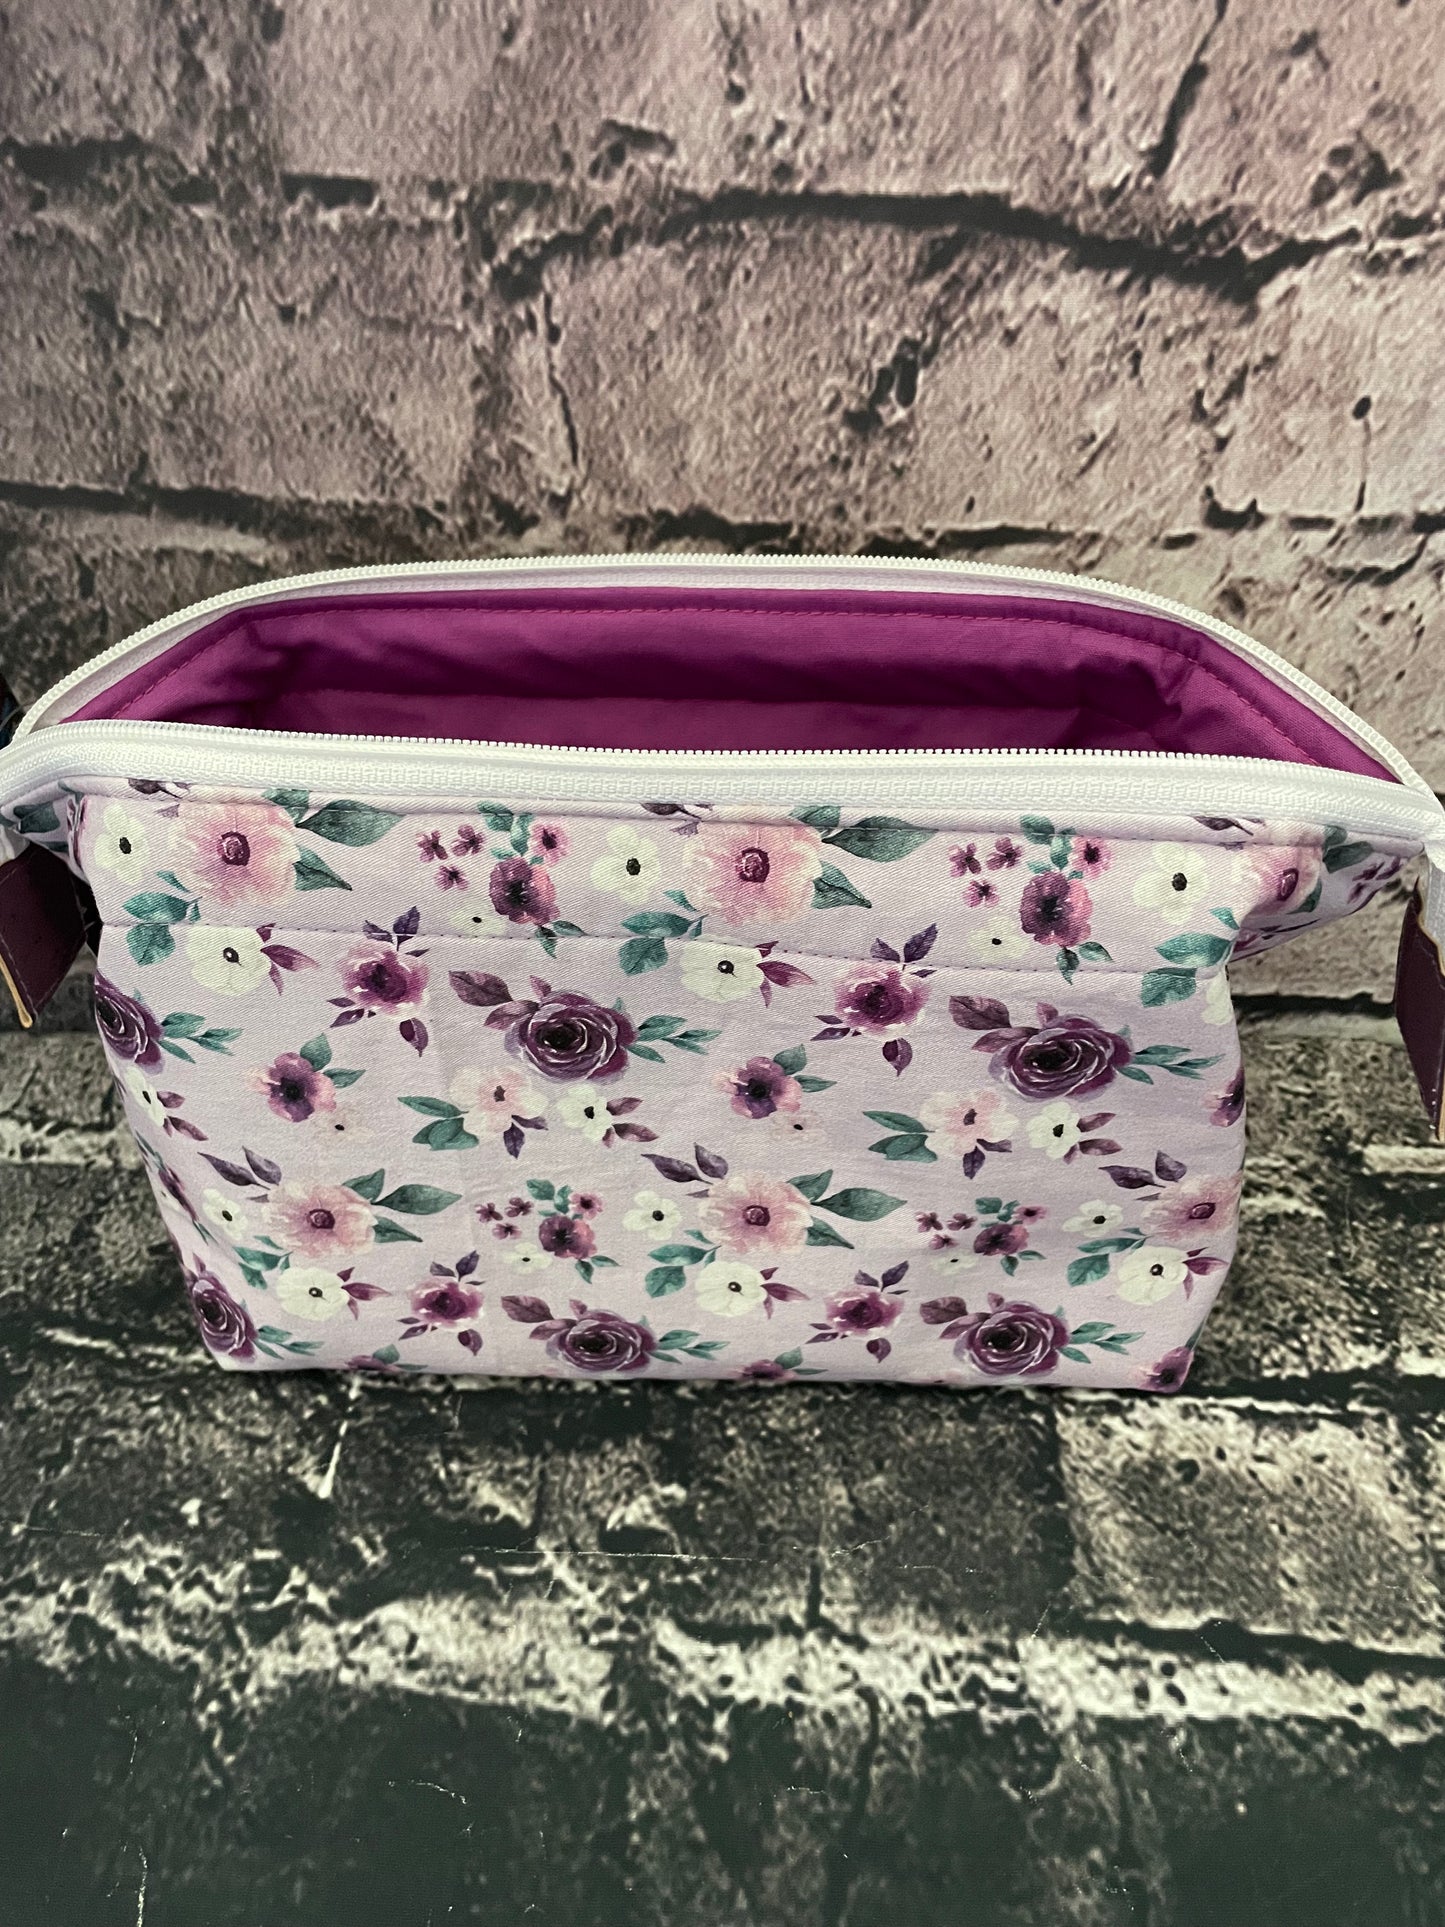 BLOOMING LOVELY MAUVE  Small wire frame bag...CUSTOM PRINT